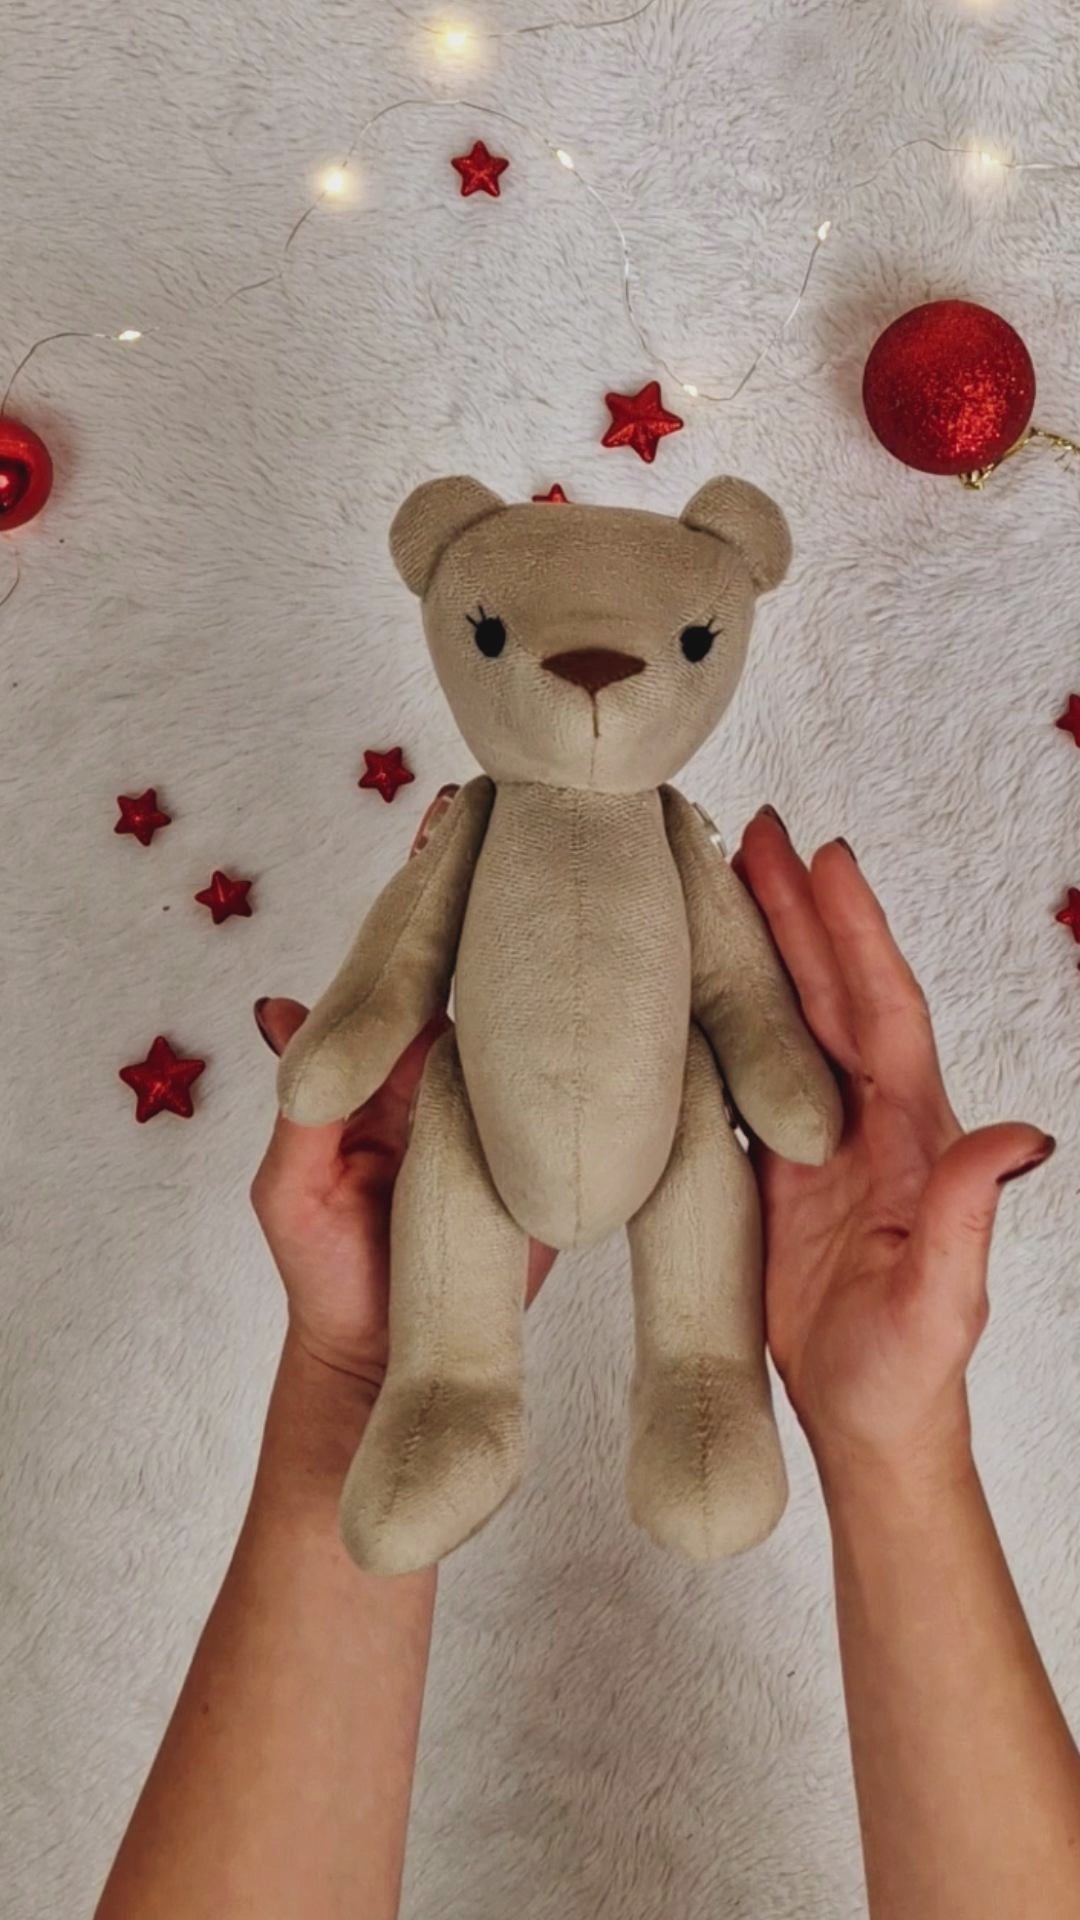 Bear Toys Family - sewing pattern and tutorial